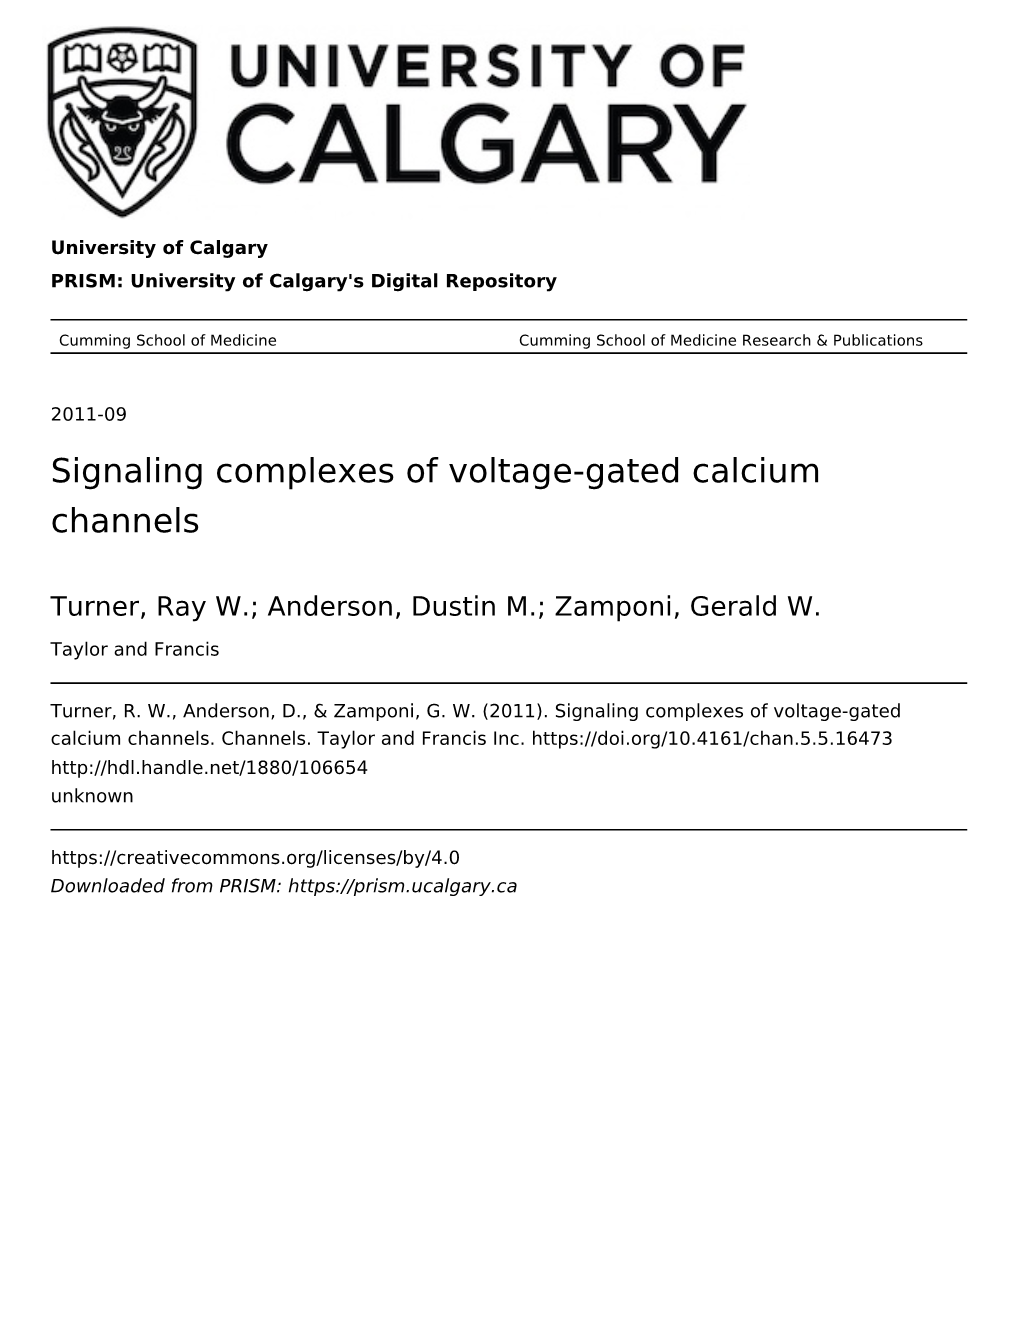 Signaling Complexes of Voltage-Gated Calcium Channels